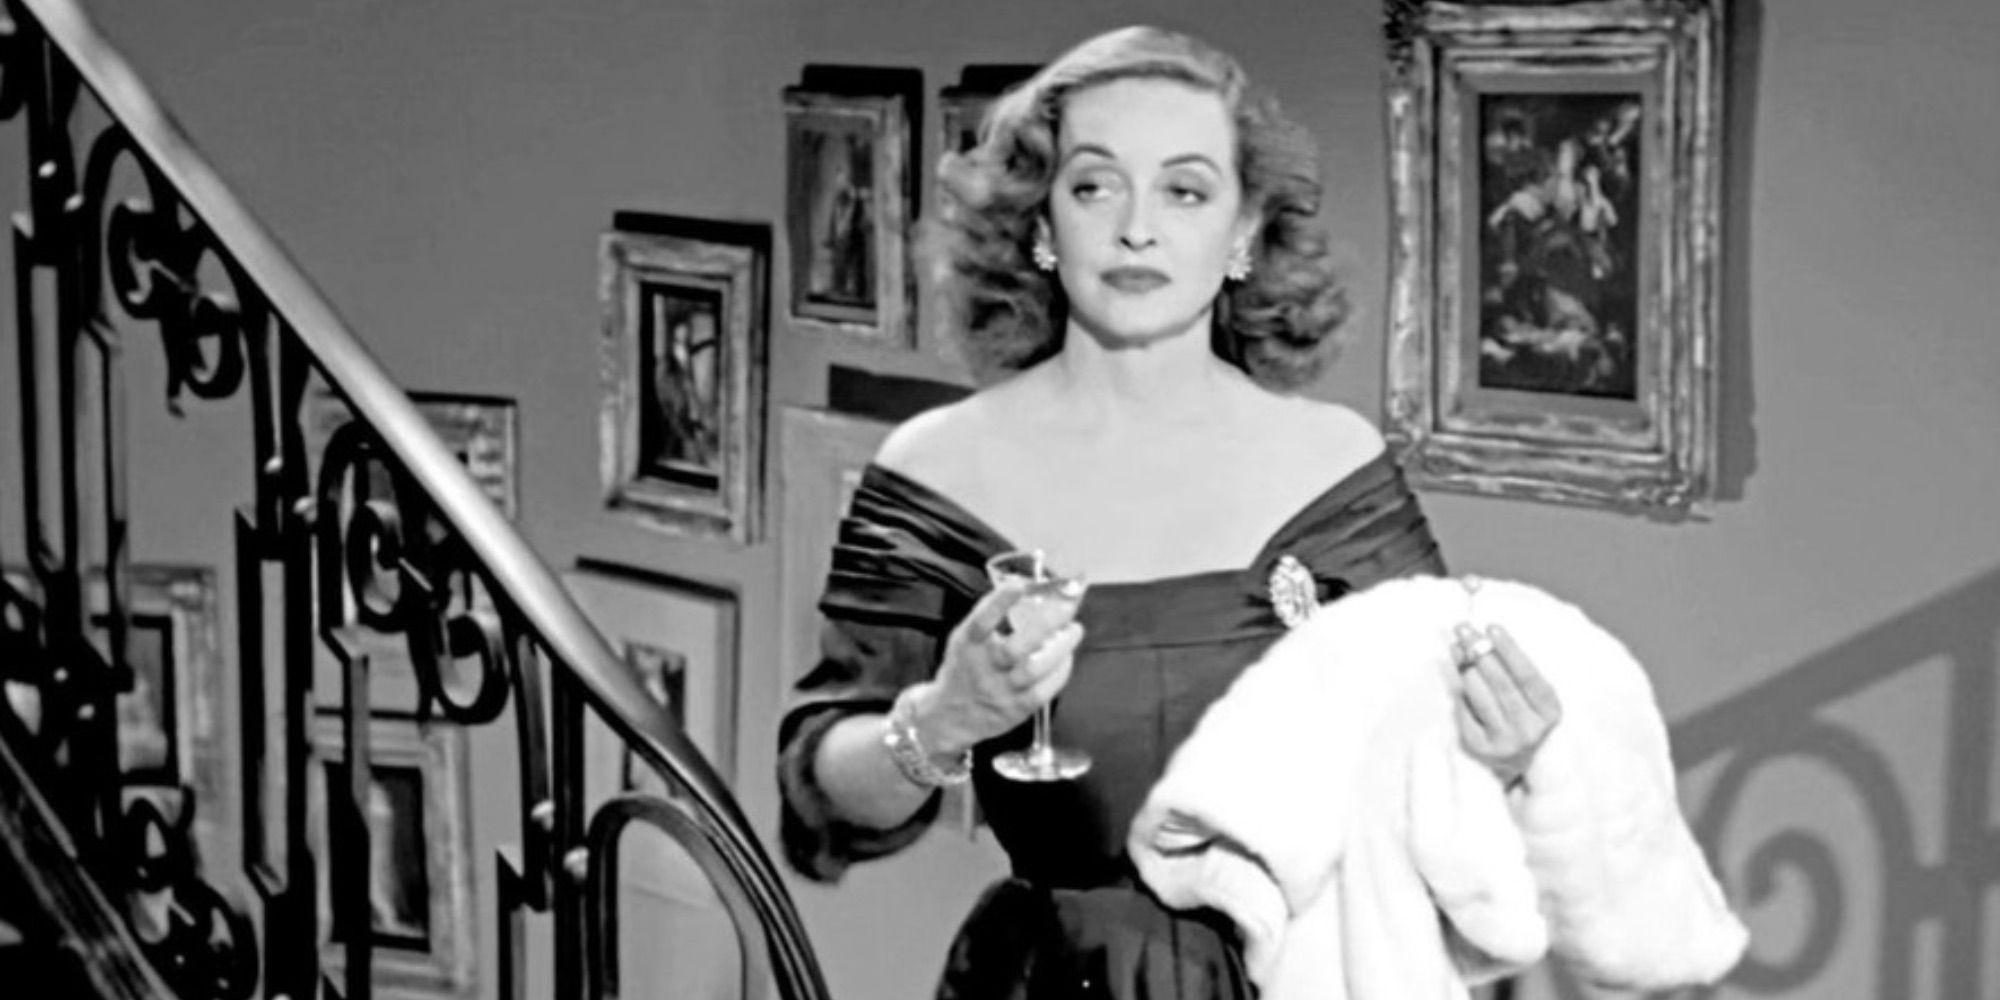 Bette Davis as Margo Channing toasting in All About Eve.